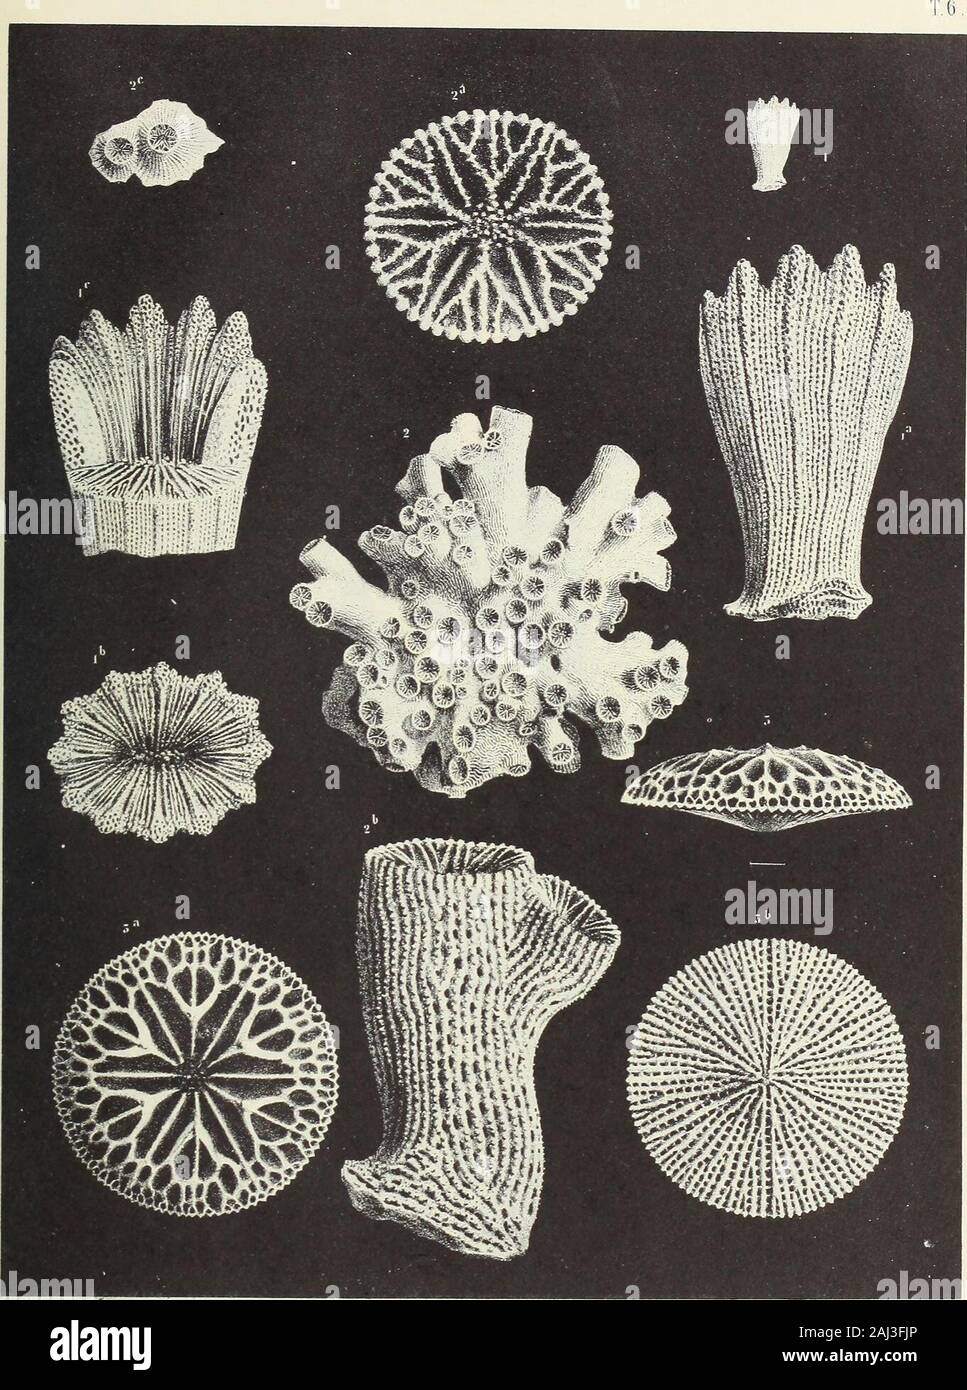 Monograph of the Palaeontographical Society . TAB. VI. CORALS FROM THE LONDON CLAY. Balanophyllia desmophyllum (p. 35). Fig. 1. Side view of a complete specimen; natural size. 1 a. The same, magnified. 1 b. Calice, magnified. 1 c. Side view of the upper part of the same, with half of the calice cut away in order to show the structure of the septa and the depth of the fossula. DeNDROPHYLLIA DENDROPHYLLOIDES (p. 36). Fig. 2. A large group; natural size. 2 a. Calice, magnified. 2 b. One of the branches, magnified to show the structure of the walls. 2 c. Two young individuals that have not yet pro Stock Photo